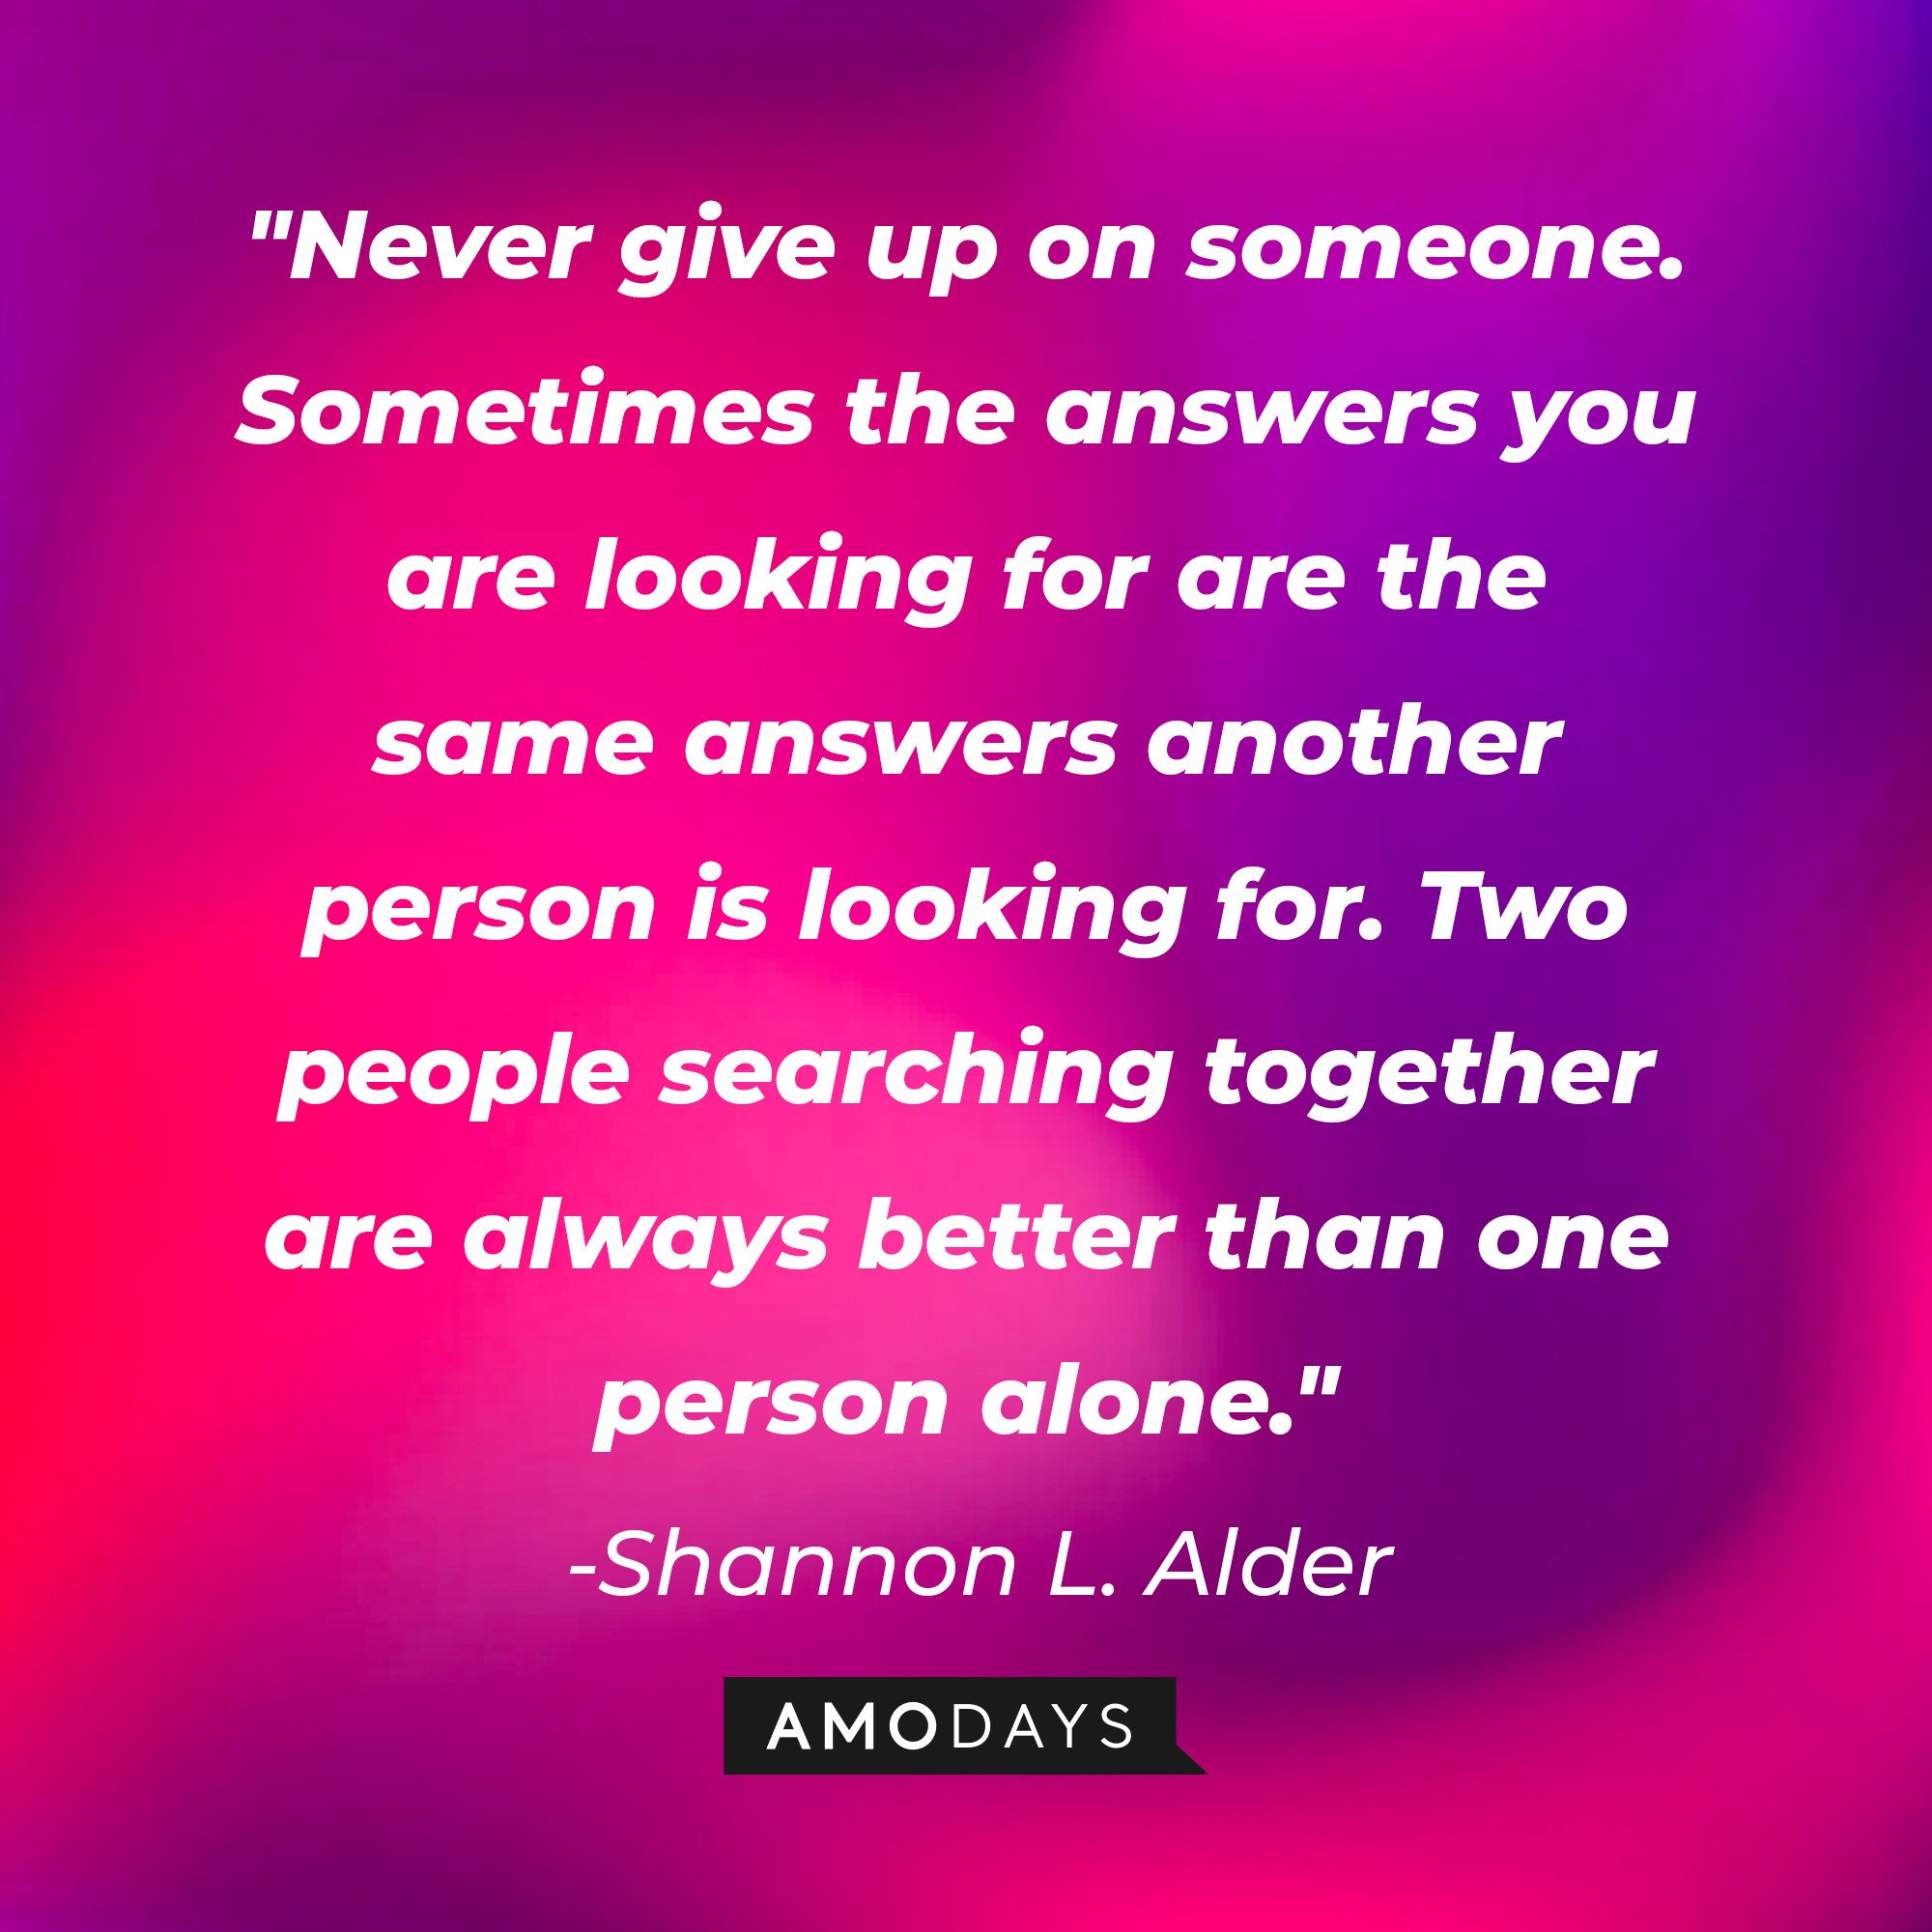 Shannon L. Alder’s quote: "Never give up on someone. Sometimes the answers you are looking for are the same answers another person is looking for. Two people searching together are always better than one person alone." | Image: AmoDays